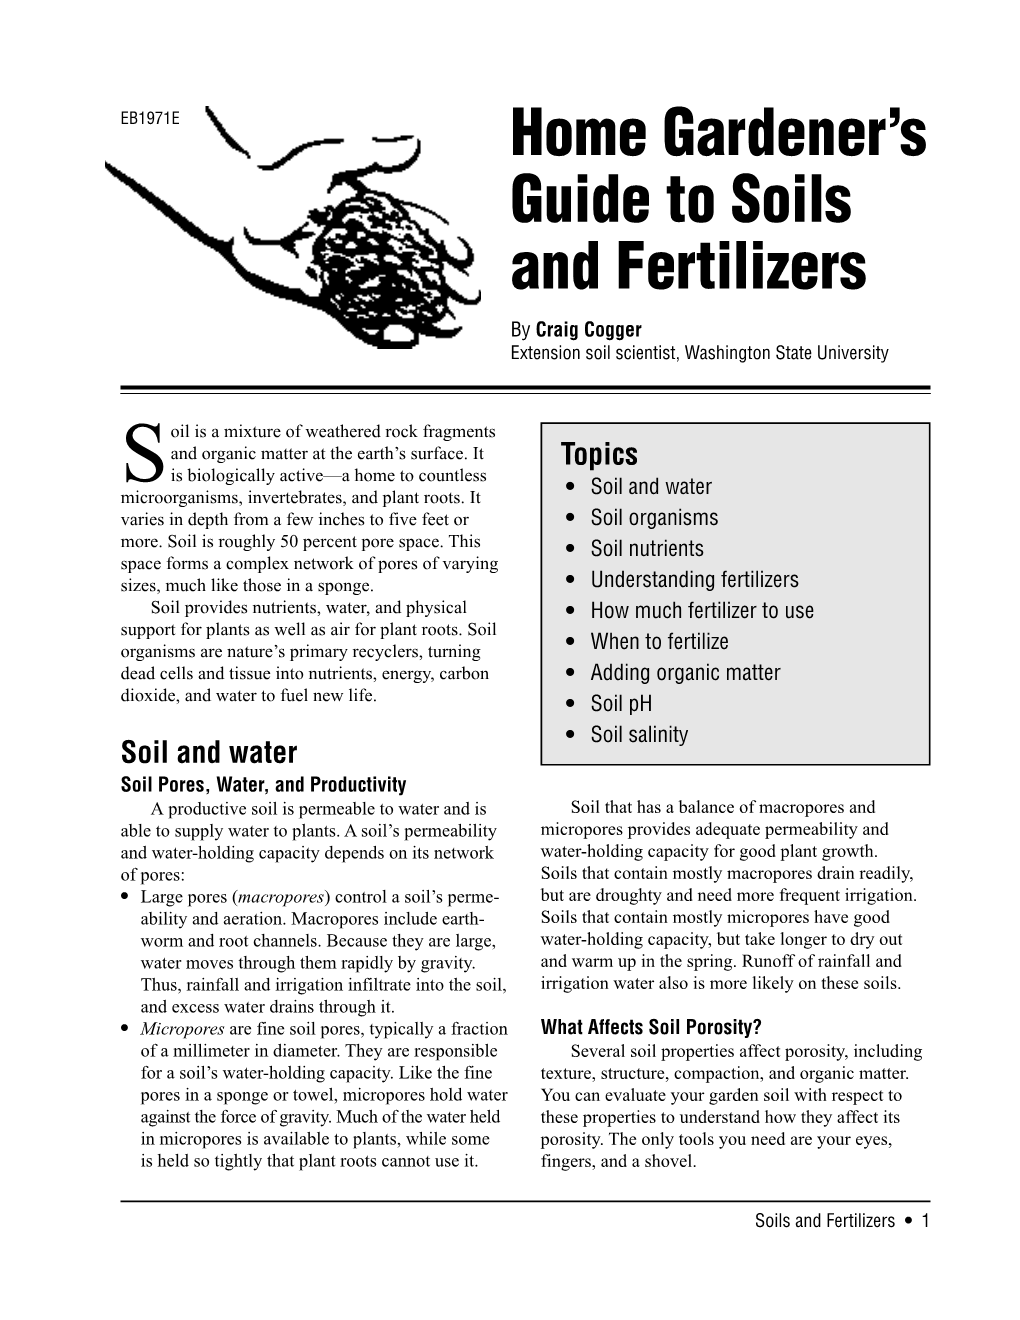 Home Gardener's Guide to Soils and Fertilizers